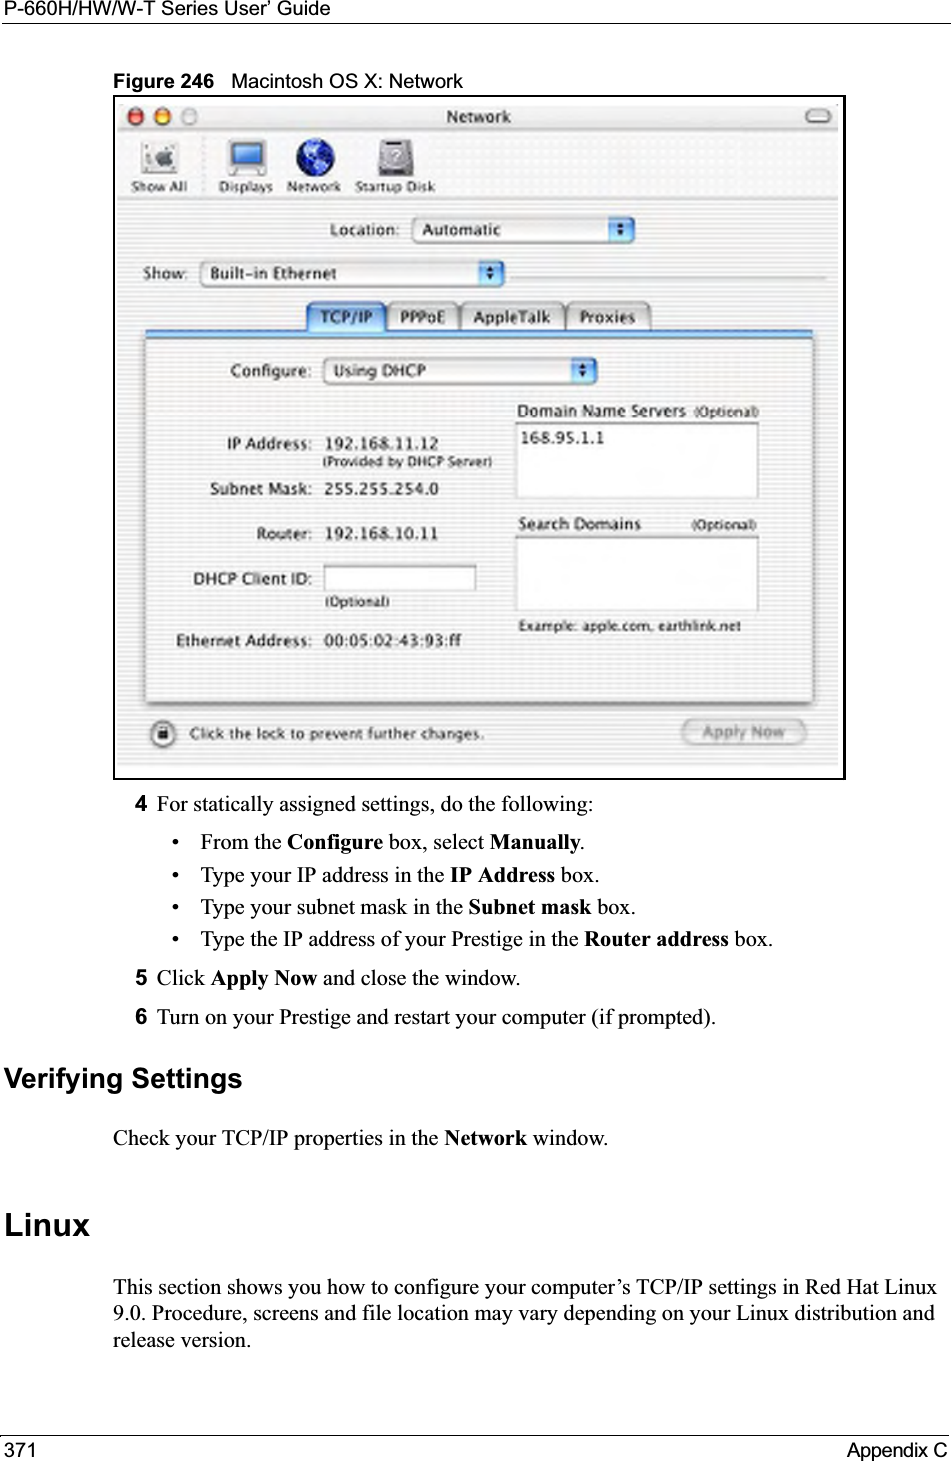 P-660H/HW/W-T Series User’ Guide371 Appendix CFigure 246   Macintosh OS X: Network4For statically assigned settings, do the following:•From the Configure box, select Manually.• Type your IP address in the IP Address box.• Type your subnet mask in the Subnet mask box.• Type the IP address of your Prestige in the Router address box.5Click Apply Now and close the window.6Turn on your Prestige and restart your computer (if prompted).Verifying SettingsCheck your TCP/IP properties in the Network window.LinuxThis section shows you how to configure your computer’s TCP/IP settings in Red Hat Linux 9.0. Procedure, screens and file location may vary depending on your Linux distribution and release version. 